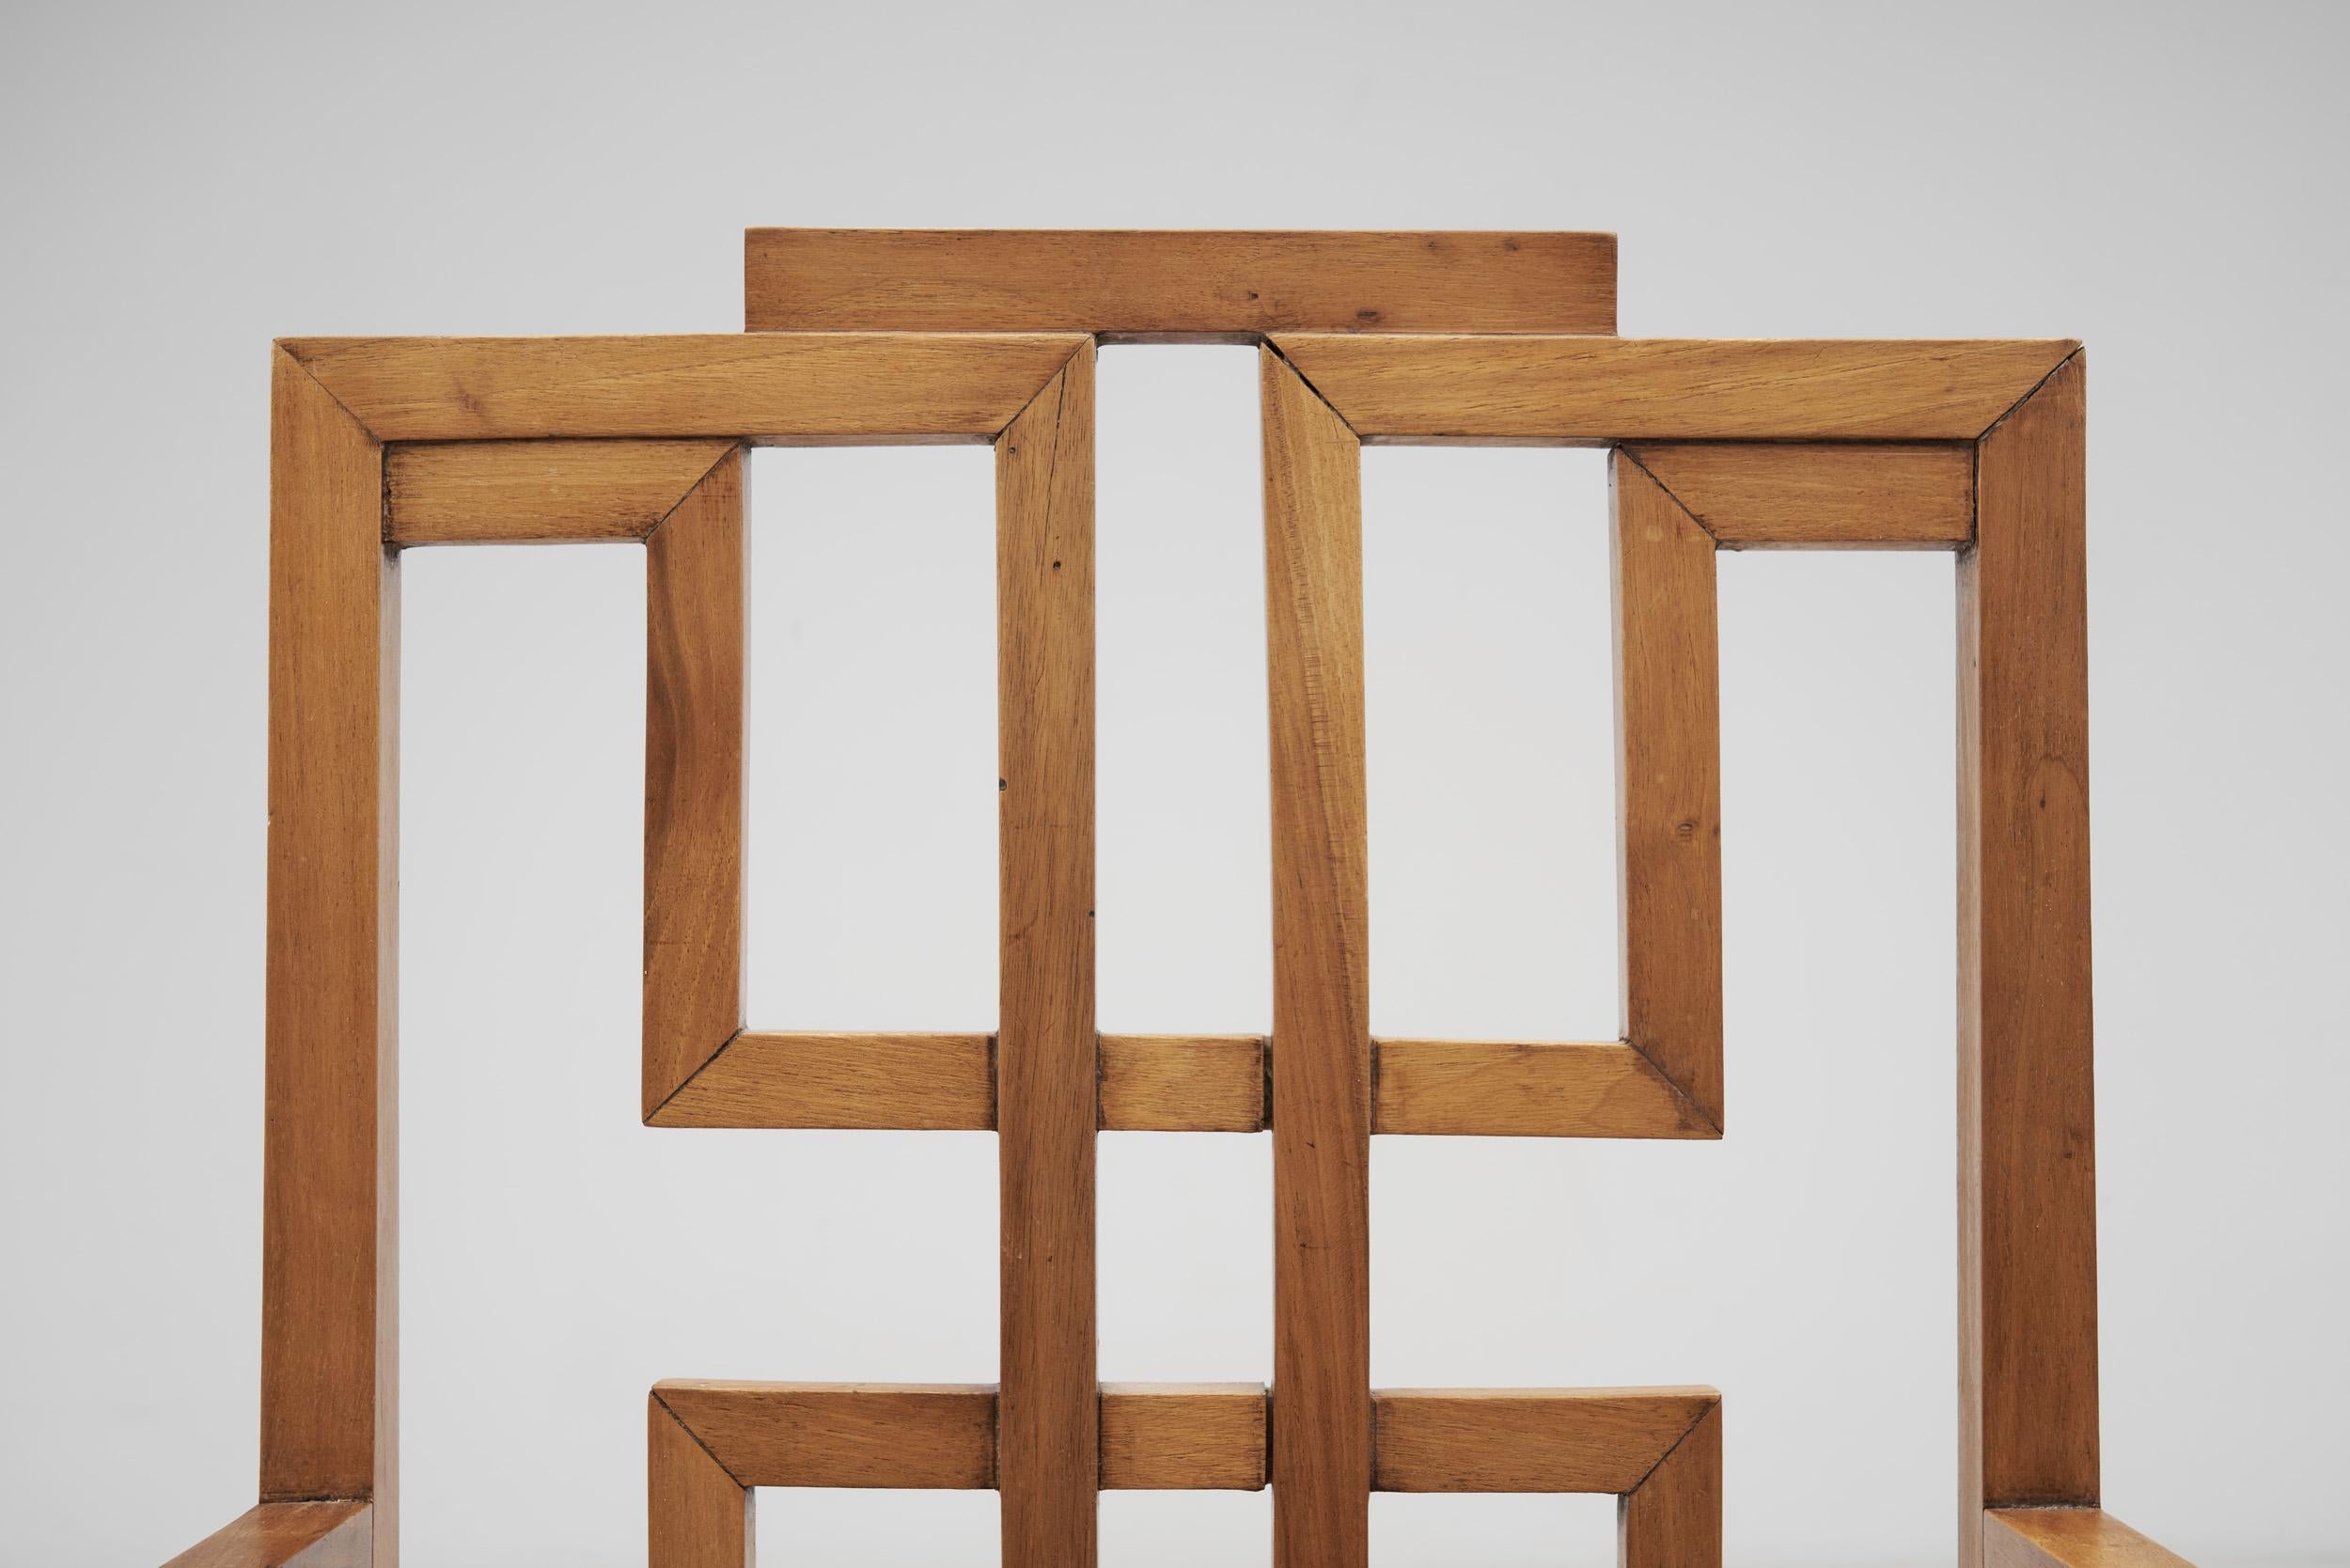 Late 20th Century Anglo-Chinese Chairs with Caned Seats, Europe 1980s For Sale 1